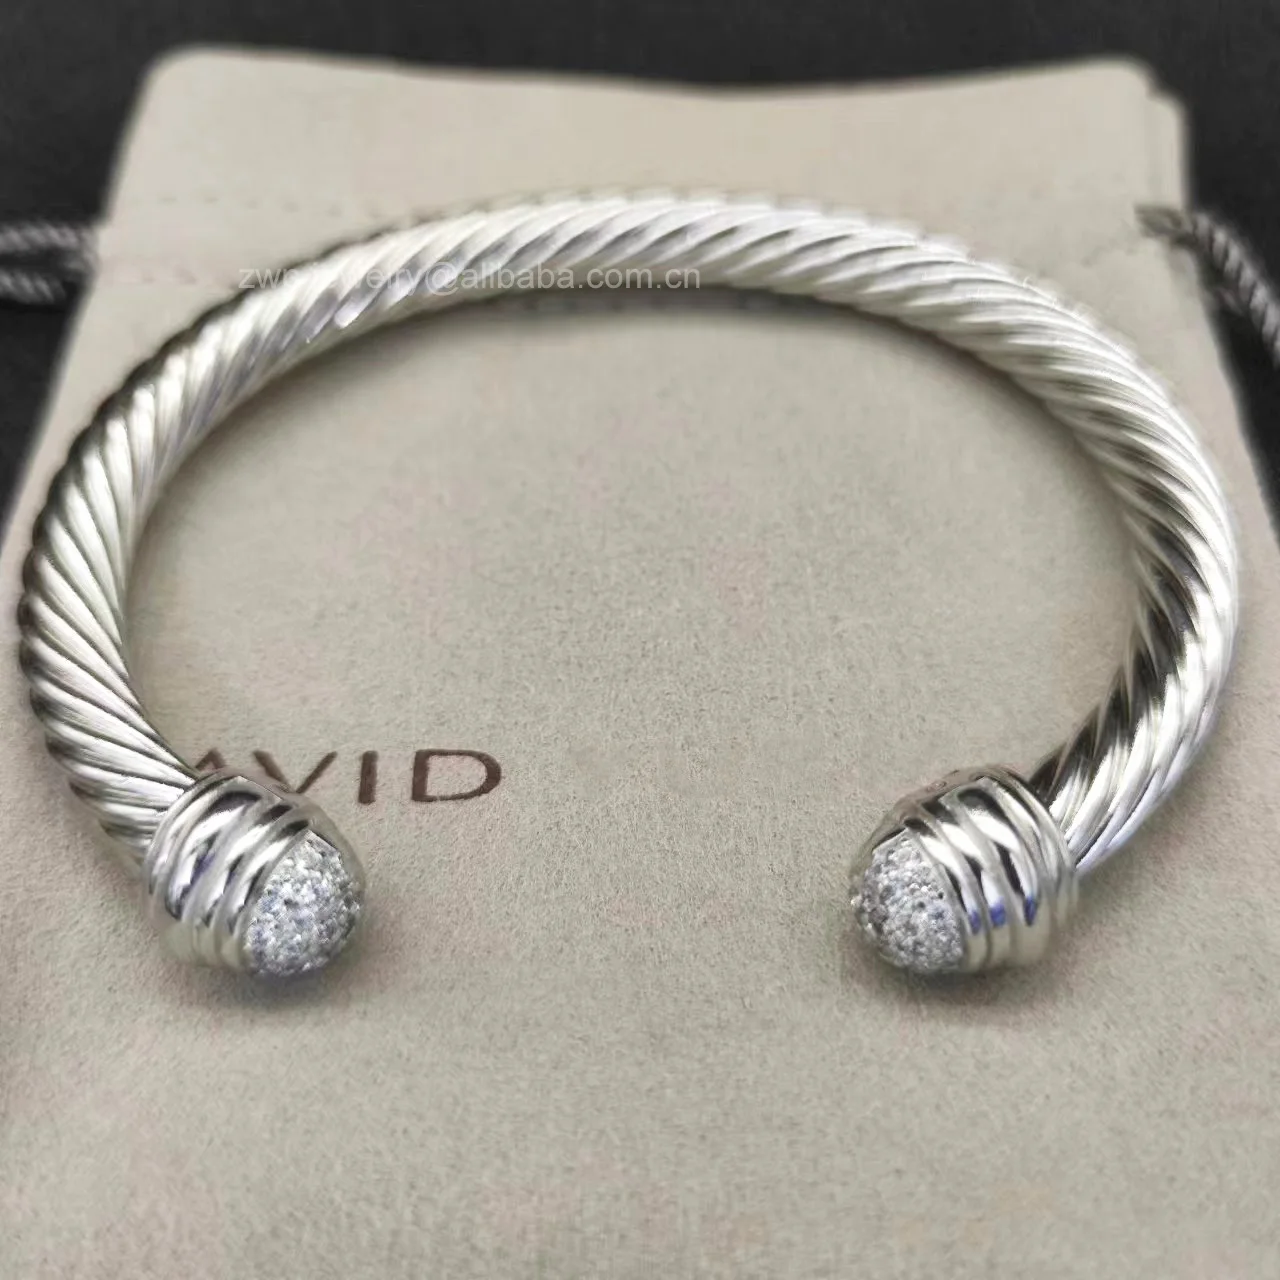 Dy Fashion Design Stainless Steel 7mm Twisted Wire Bracelet Vintage ...